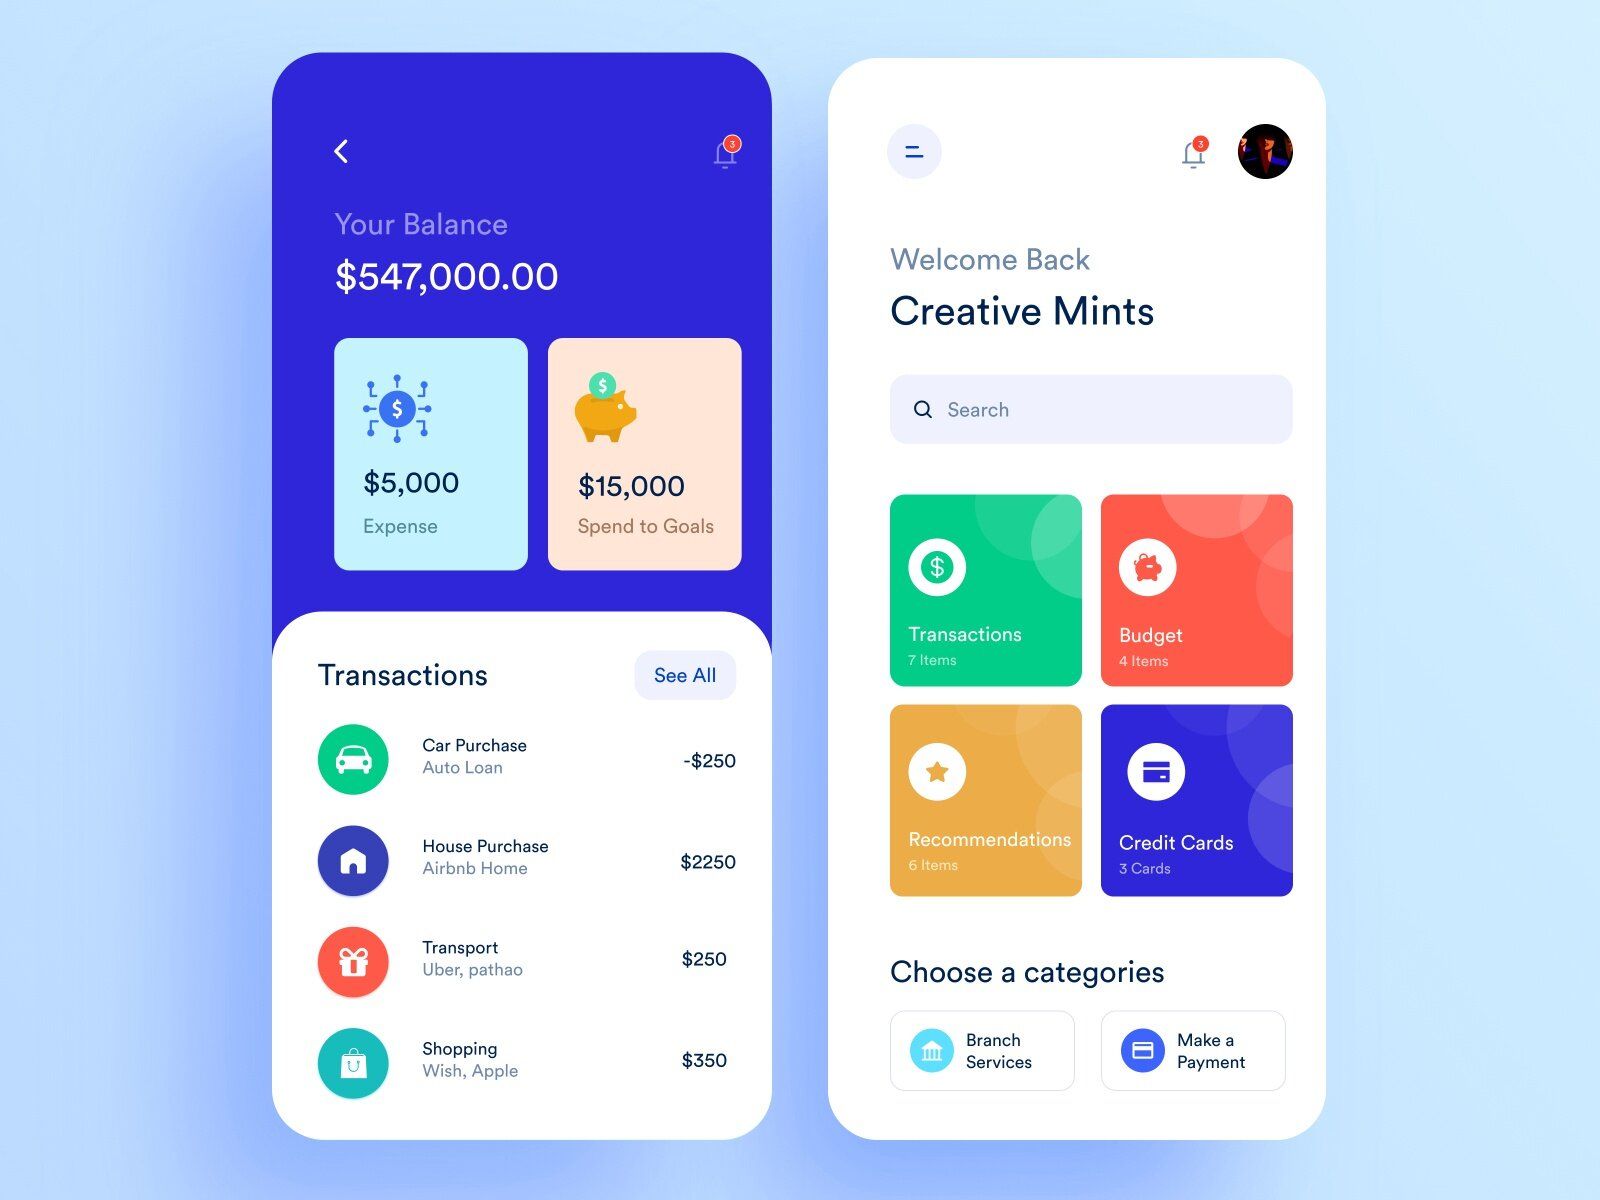 Think about adding the home screen feature to the mobile app during mobile banking application development (*image by [Masudur Rahman](https://dribbble.com/uigeek){ rel="nofollow" .default-md}*)